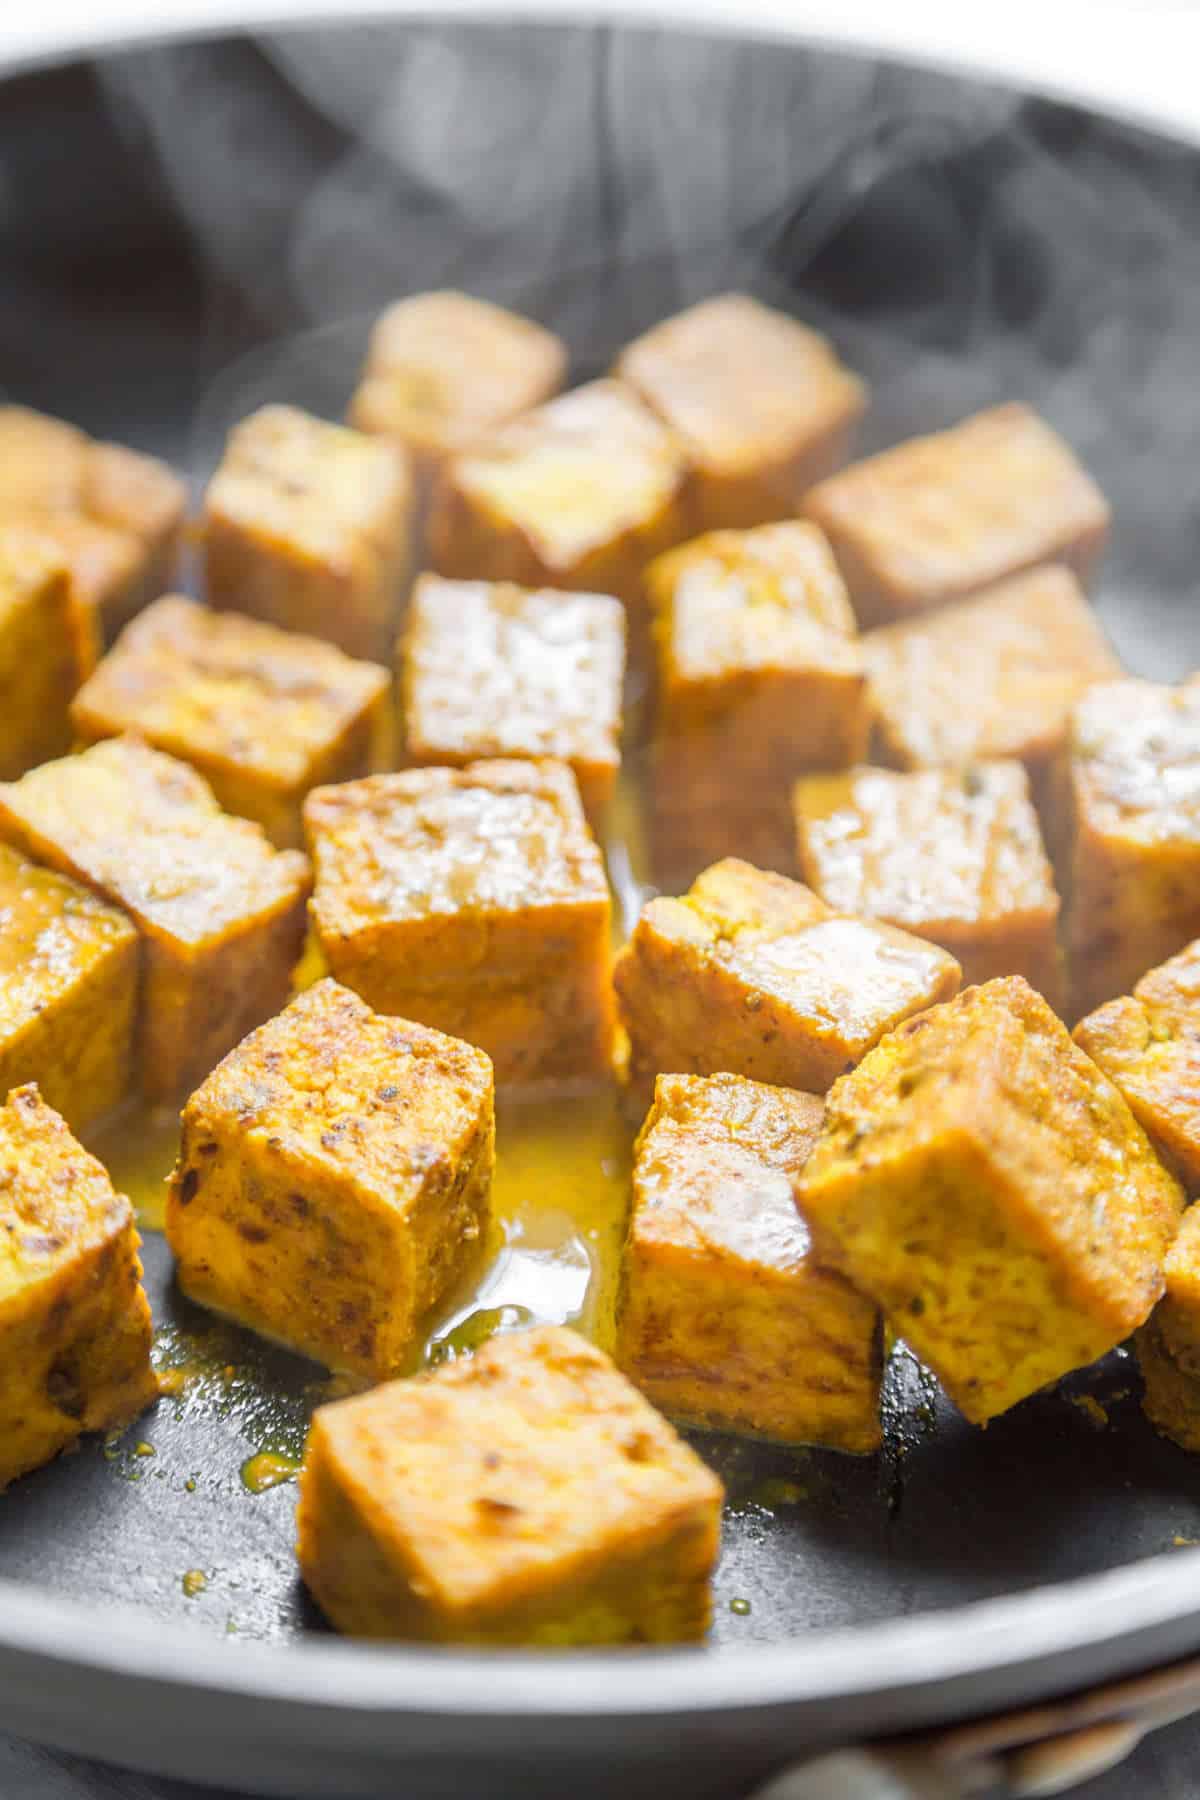 Tofu cooking in a large skillet with steam coming off.